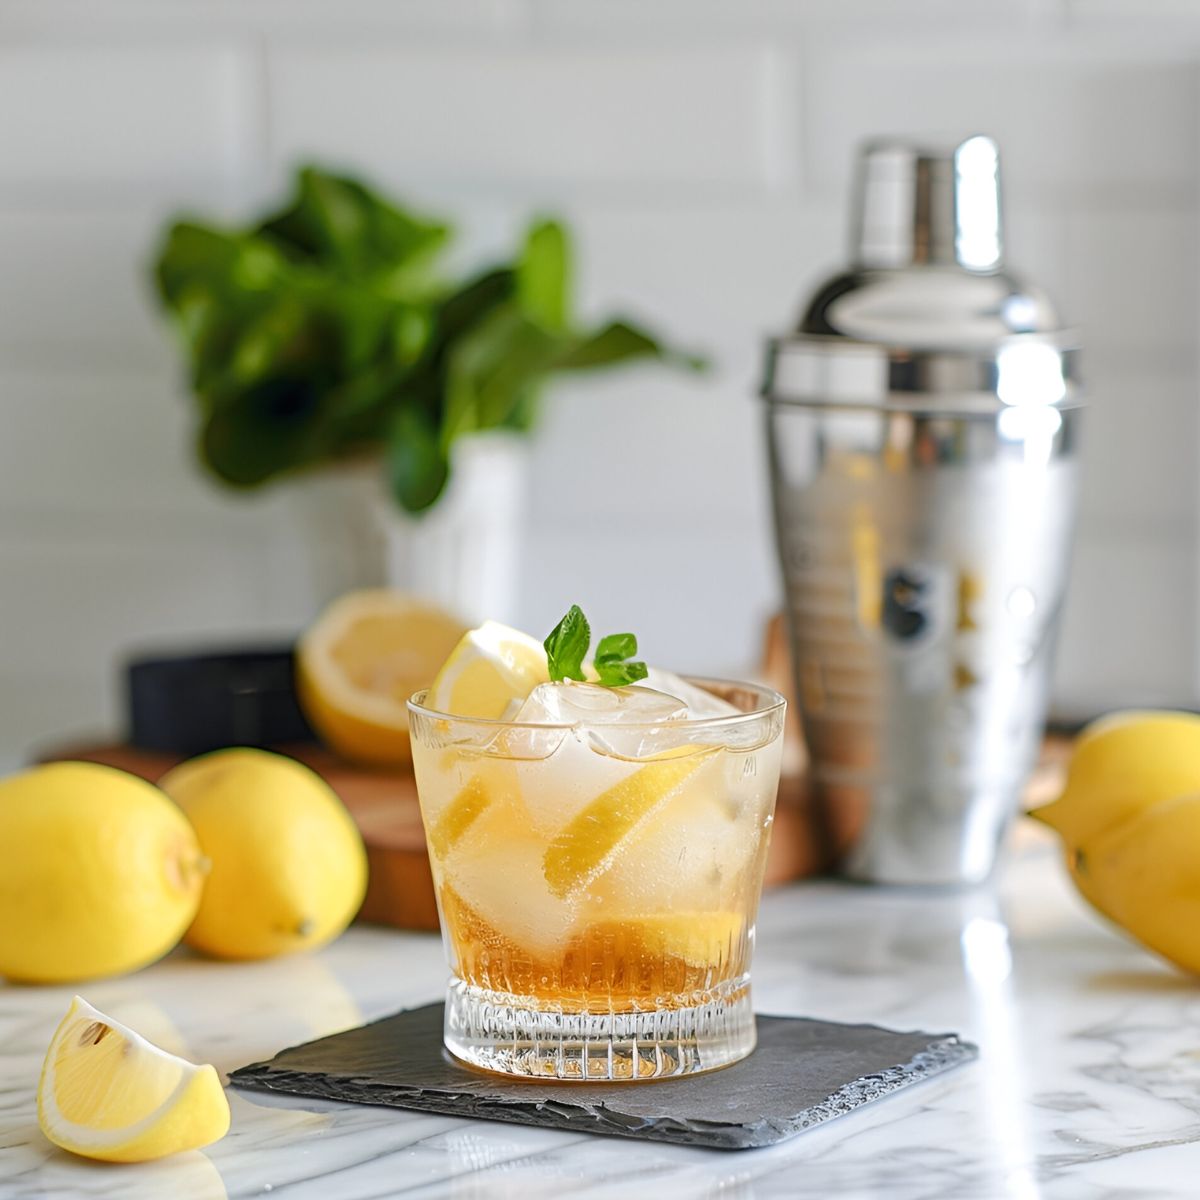 Bourbon Smash in Rocks Glass with Ice, Lemon Slices, and Mint on a Slate Coaster on a White Marble Table with Lemons and a Cocktail Shaker in the Background